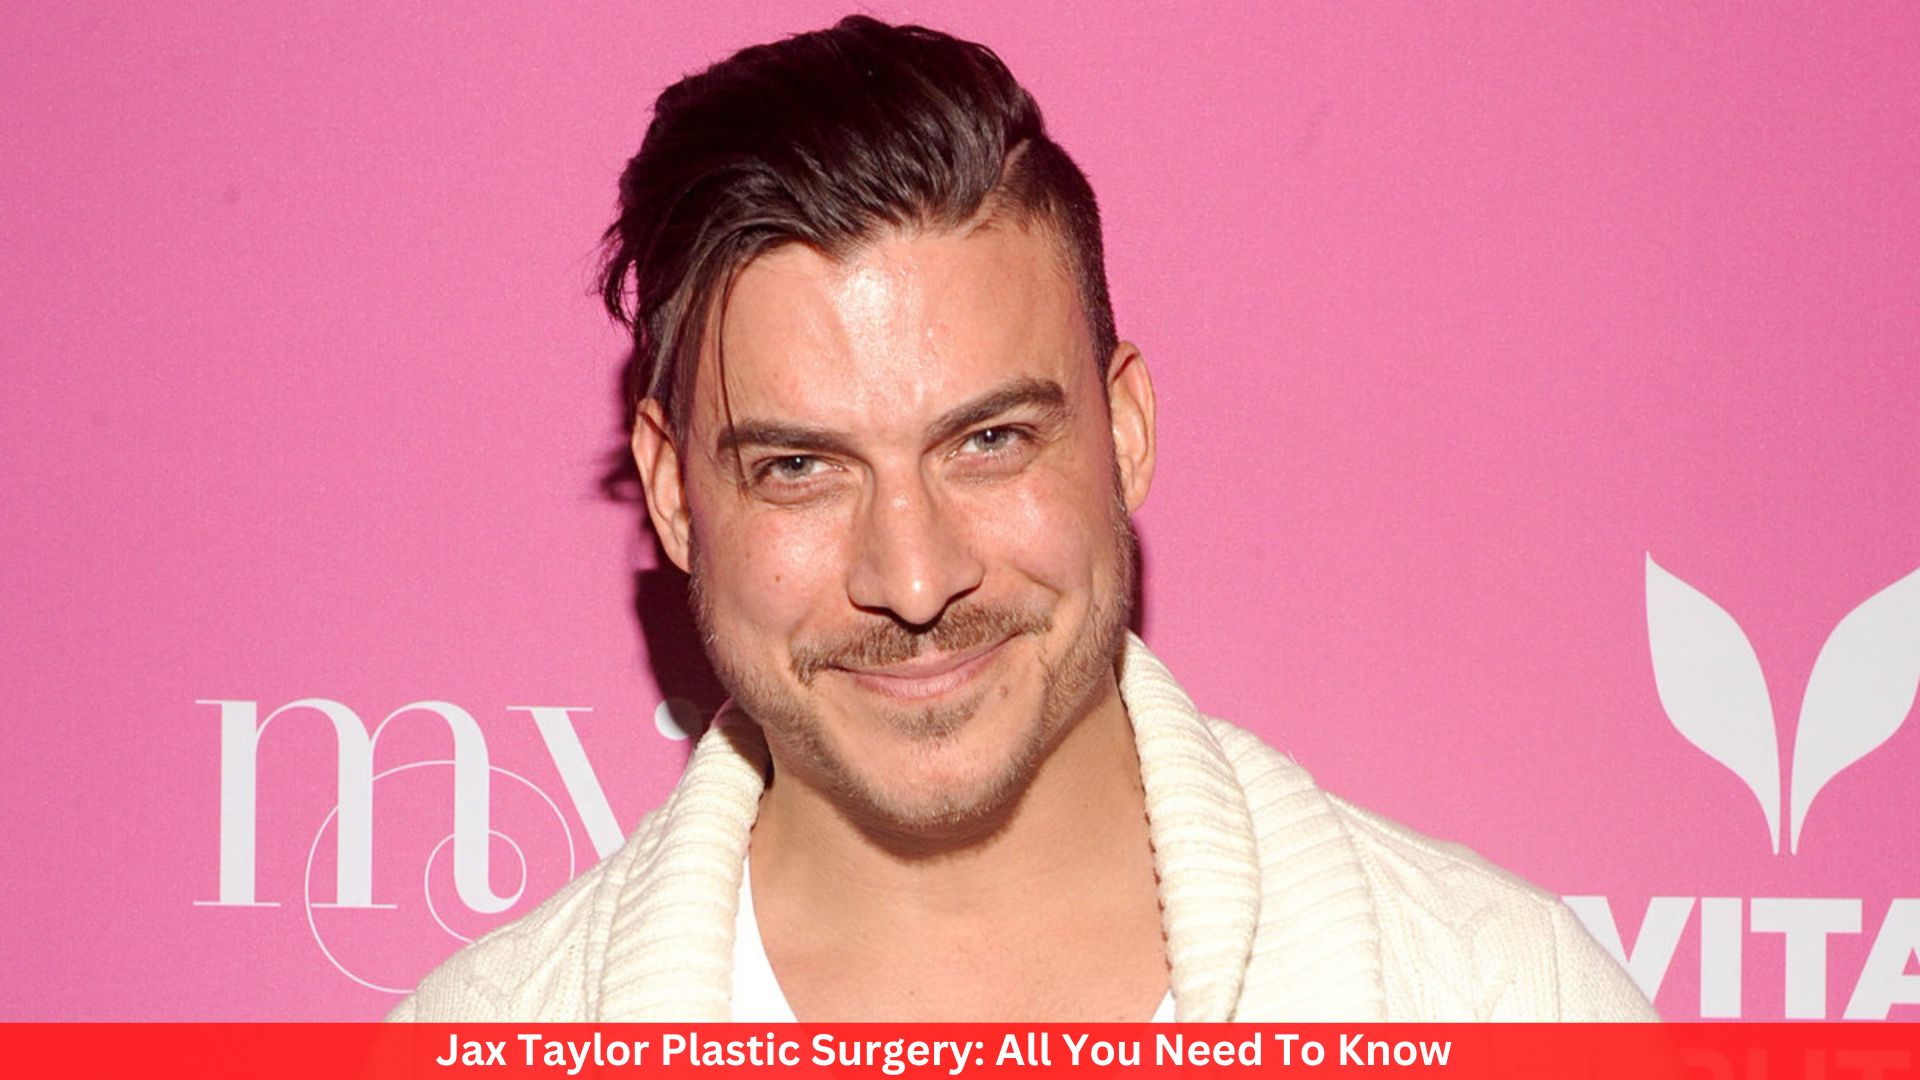 Jax Taylor Plastic Surgery: All You Need To Know